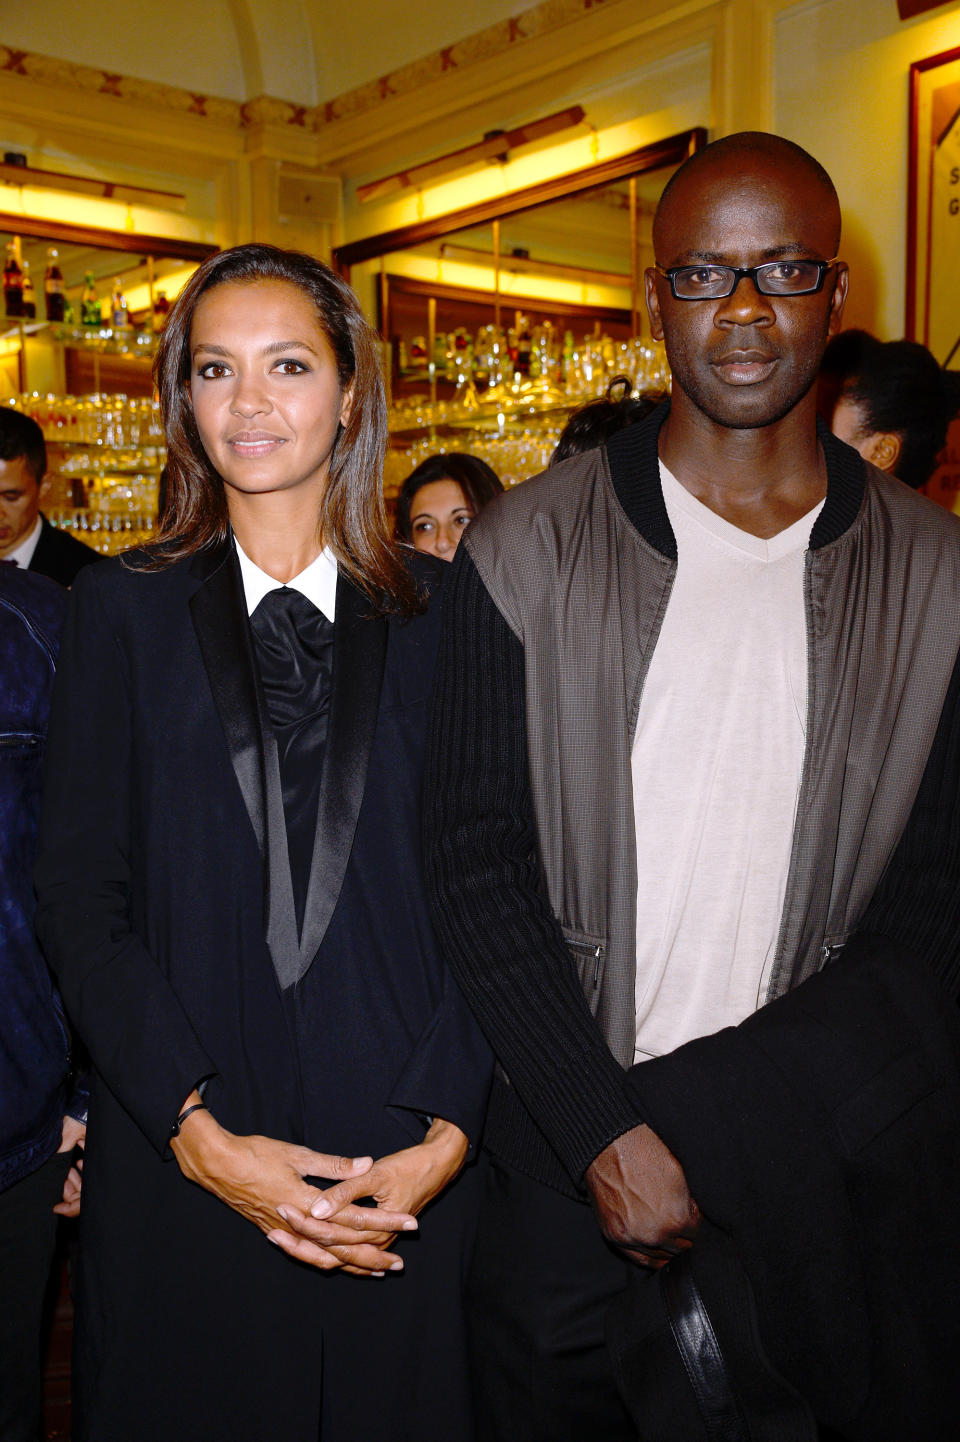 PARIS, FRANCE - JUNE 24:  Karine Le Marchand and Lilian Thuram attend the Ary Abittan performance at Theater Edouard VII benefiting 'Un Coeur Pour La Paix' on June 24, 2013 in Paris, France.  (Photo by Bertrand Rindoff Petroff/Getty Images)